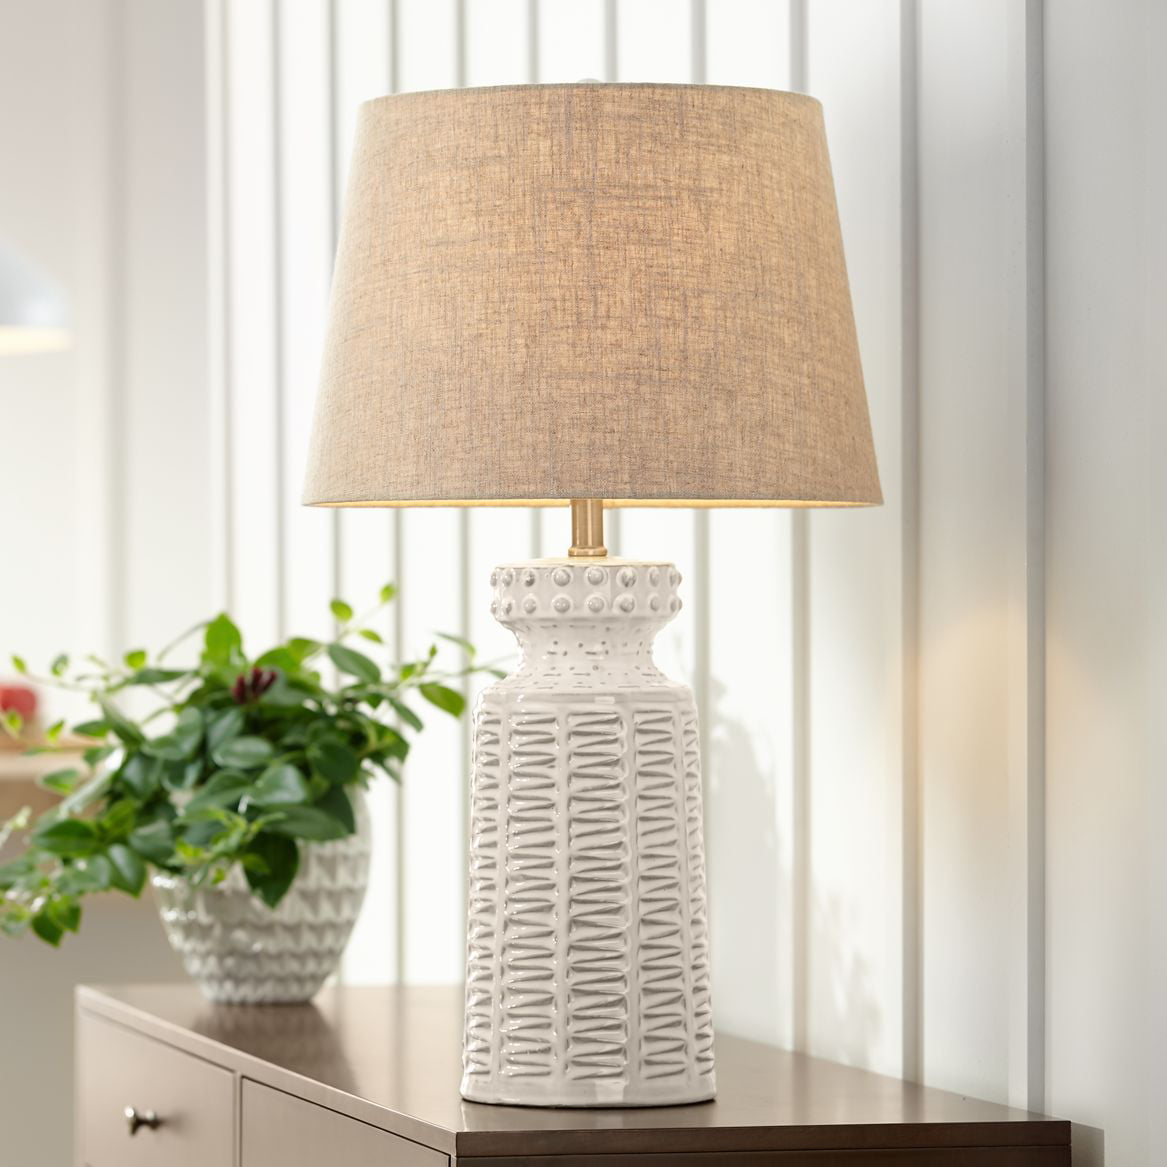 360 Lighting Country Cottage Table Lamp Ceramic Rustic Cream White Glaze Linen Tapered Drum